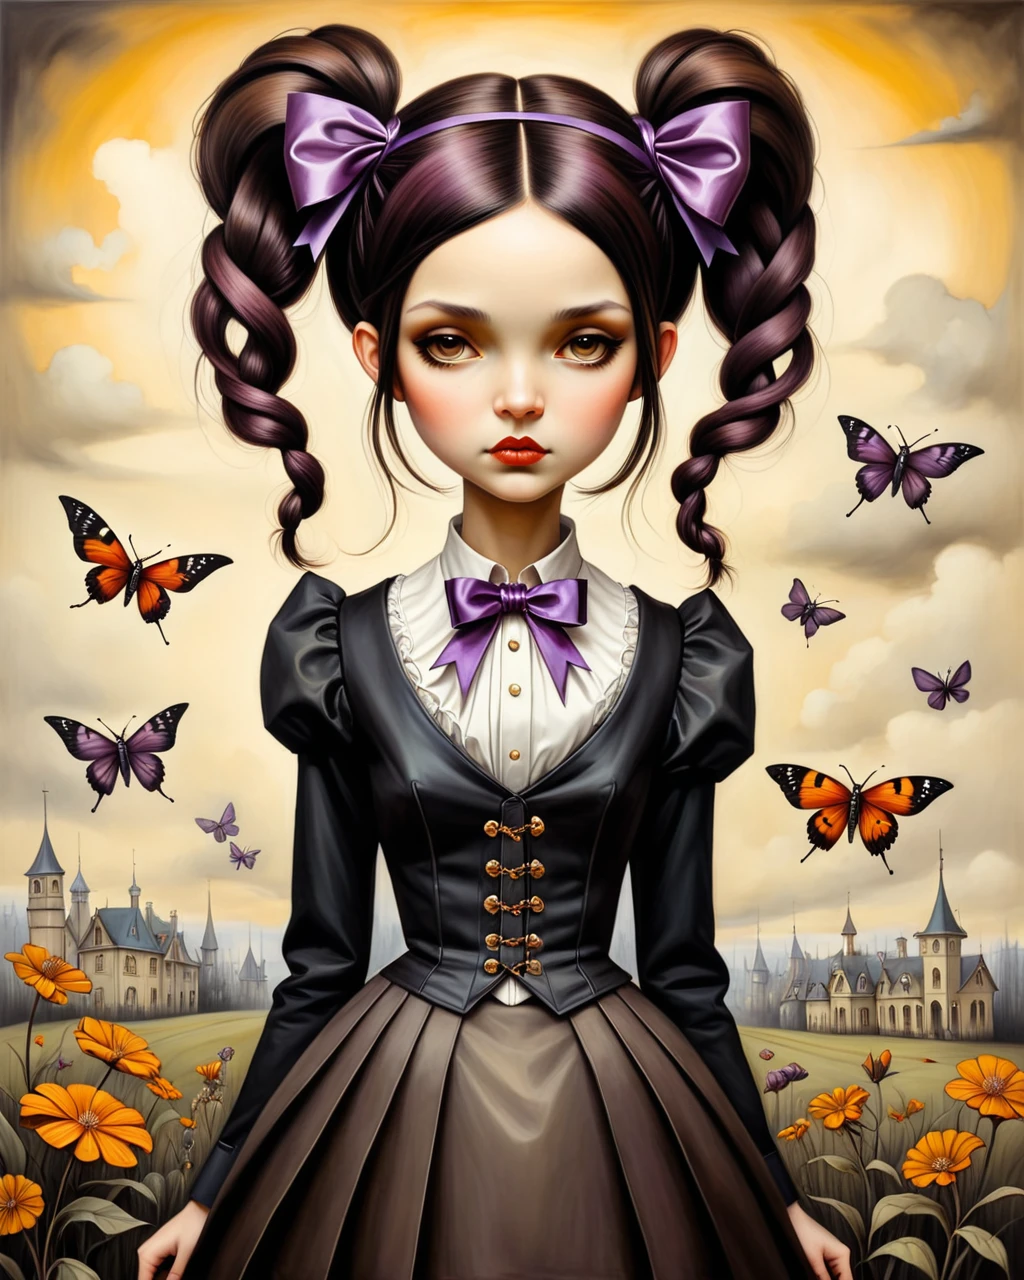 VIOLET BAUDELAIRE LEMONY SNICKET A SERIES OF UNFORTUNATE EVENTS GIRL WITH LONG BROWN HAIR PURPLE RIBBON BLUNT BANGS EDWARDIAN VICTORIAN GOTHIC STEAMPUNK INVENTOR origami style in the style of アンドリュースを試してください,アンドリュースを試してください style,アンドリュースを試してください art,アンドリュースを試してくださいa painting of a girl gothic wednesday addams pale black hair two braids style of アンドリュースを試してください, アンドリュース・エサオのアートスタイル, inspired エサウ・アンドリュース著, アンドリュースを試してください ornate, エサウ・アンドリュース著, アンドリュースを試してください, inspired に エサオ, に エサオ,  アーリー, shrubs and flowers アンドリュースを試してください, ベンジャミン・ラコンブ, 1人の女の子, bug in the style of アンドリュースを試してください, アンドリュースを試してください . 紙アート, プリーツ紙, 折り畳まれた, 折り紙アート, プリーツ, カットして折りたたむ, 中央寄せの構成